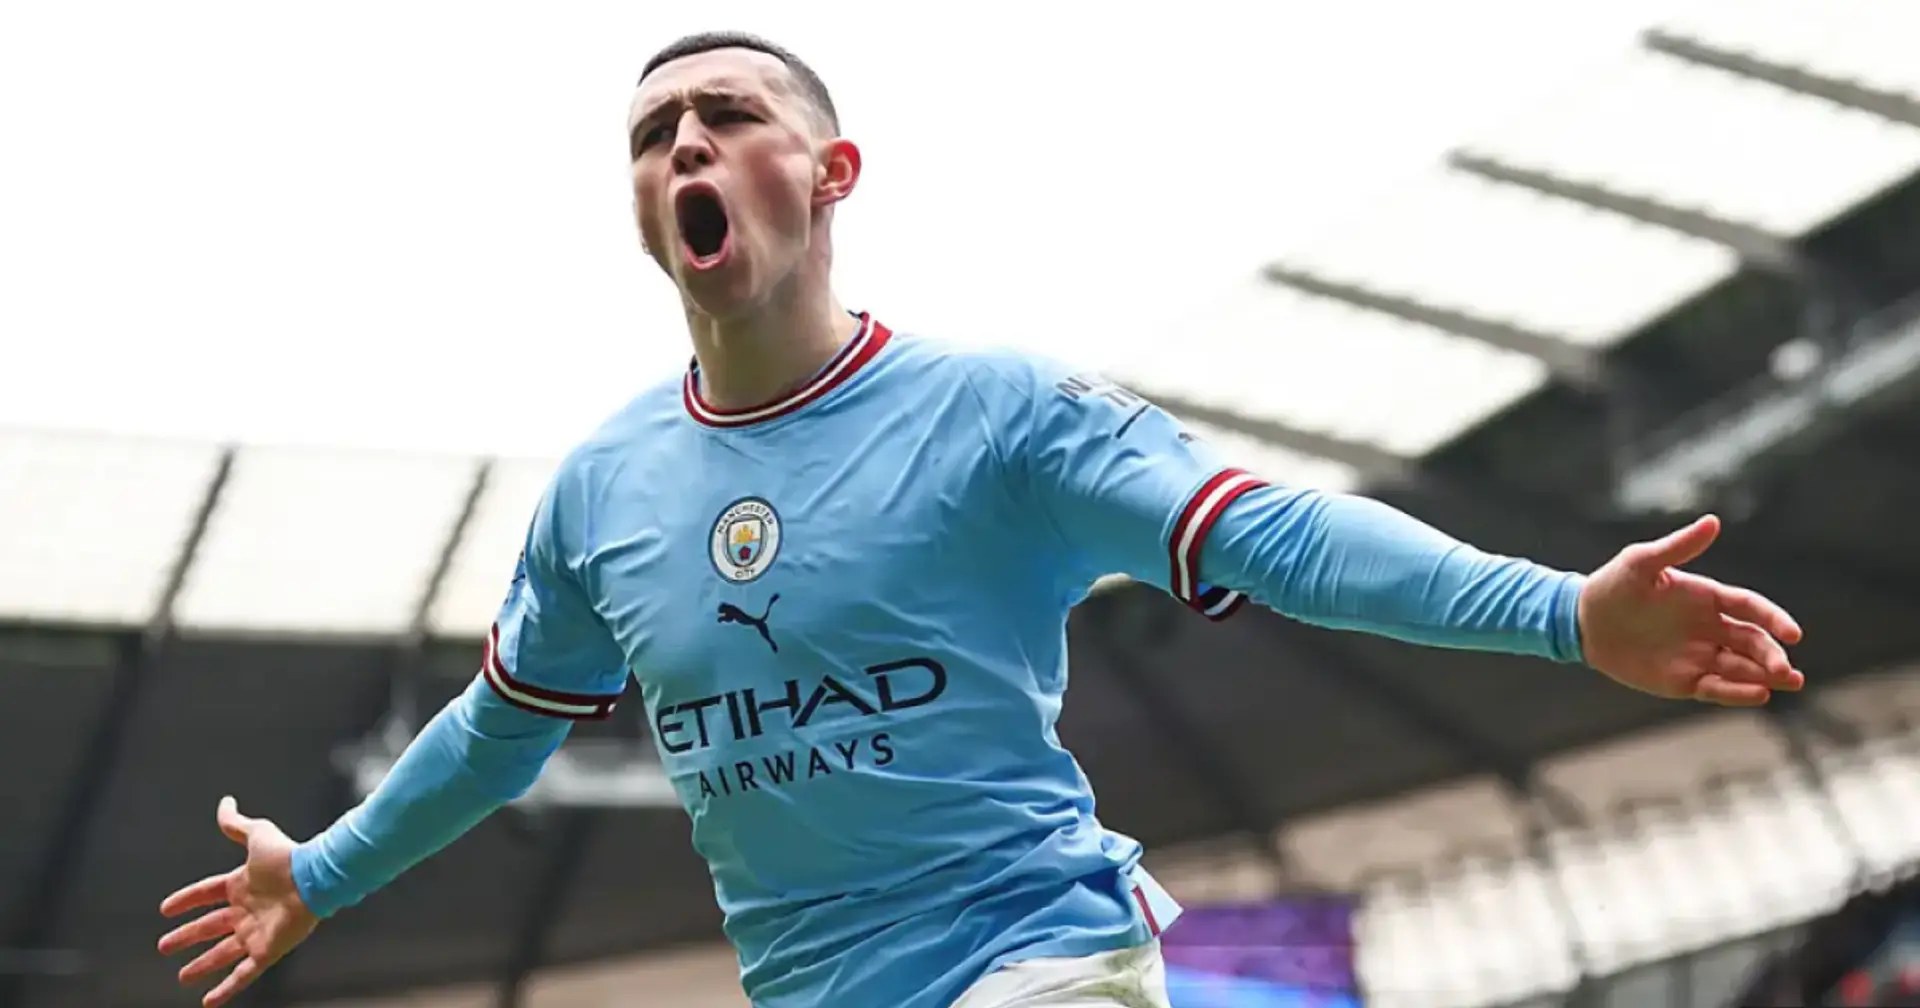 'Phil can play in all five positions up front': Guardiola on Southgate's claim that Foden cannot operate in central areas